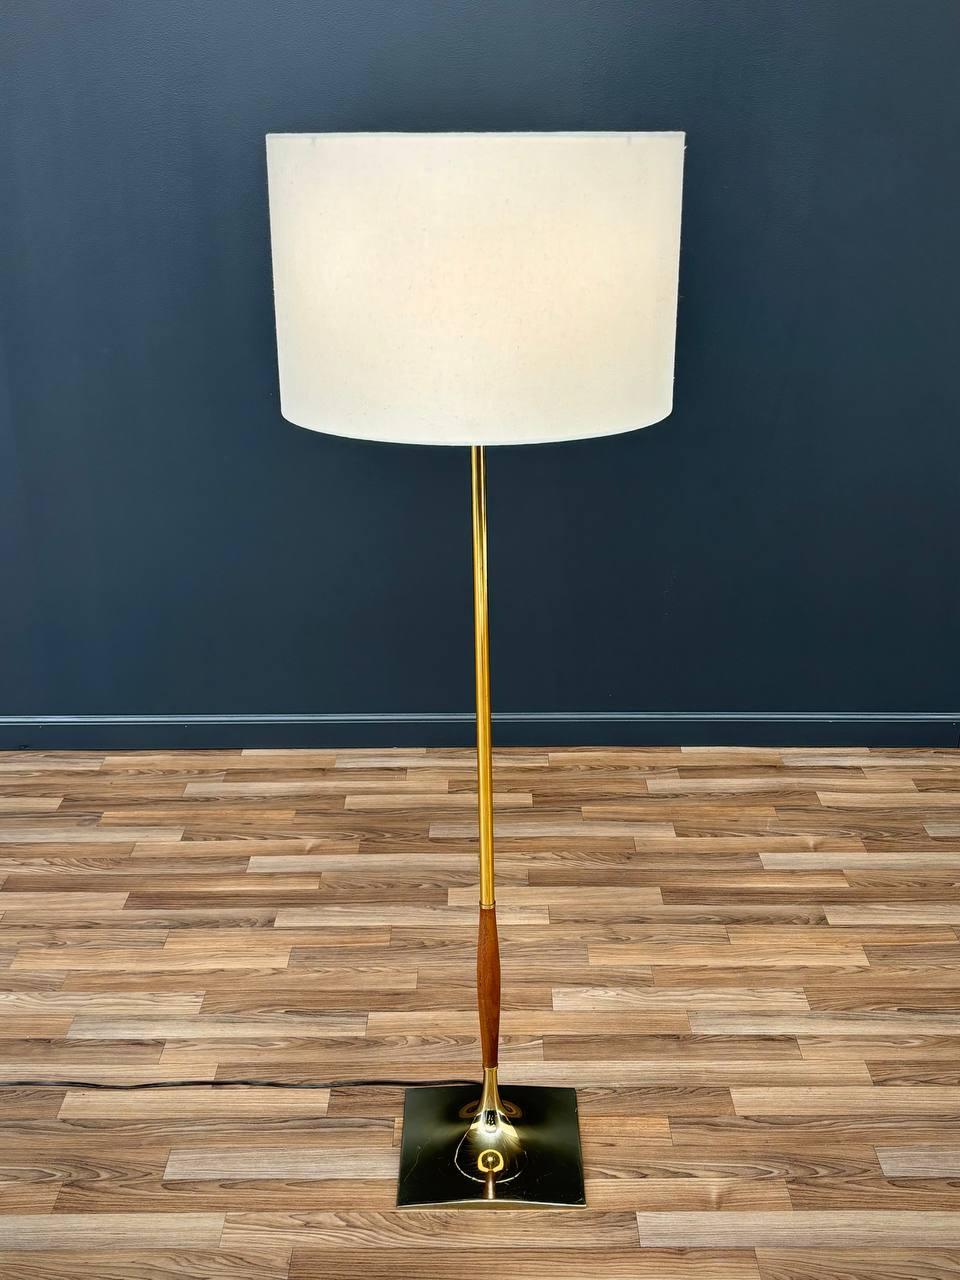 Newly Rewired, New Linen Lamp Shade

Dimensions: 
Lamp:
54”H x 10”W x 10”D
Shade:
12